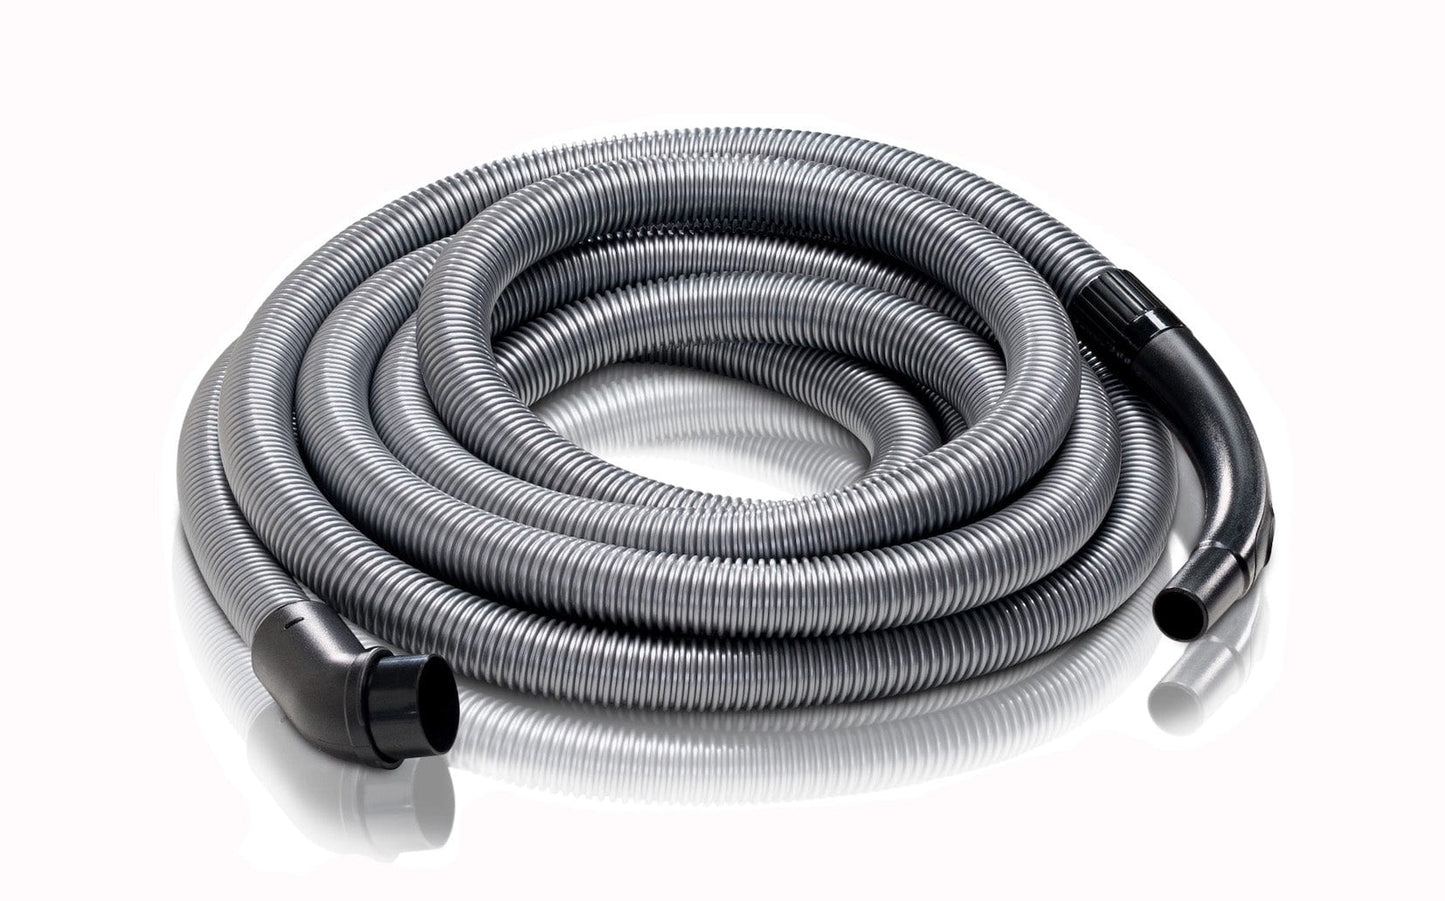 Prolux Wet/Dry Garage Vac Replacement Hose